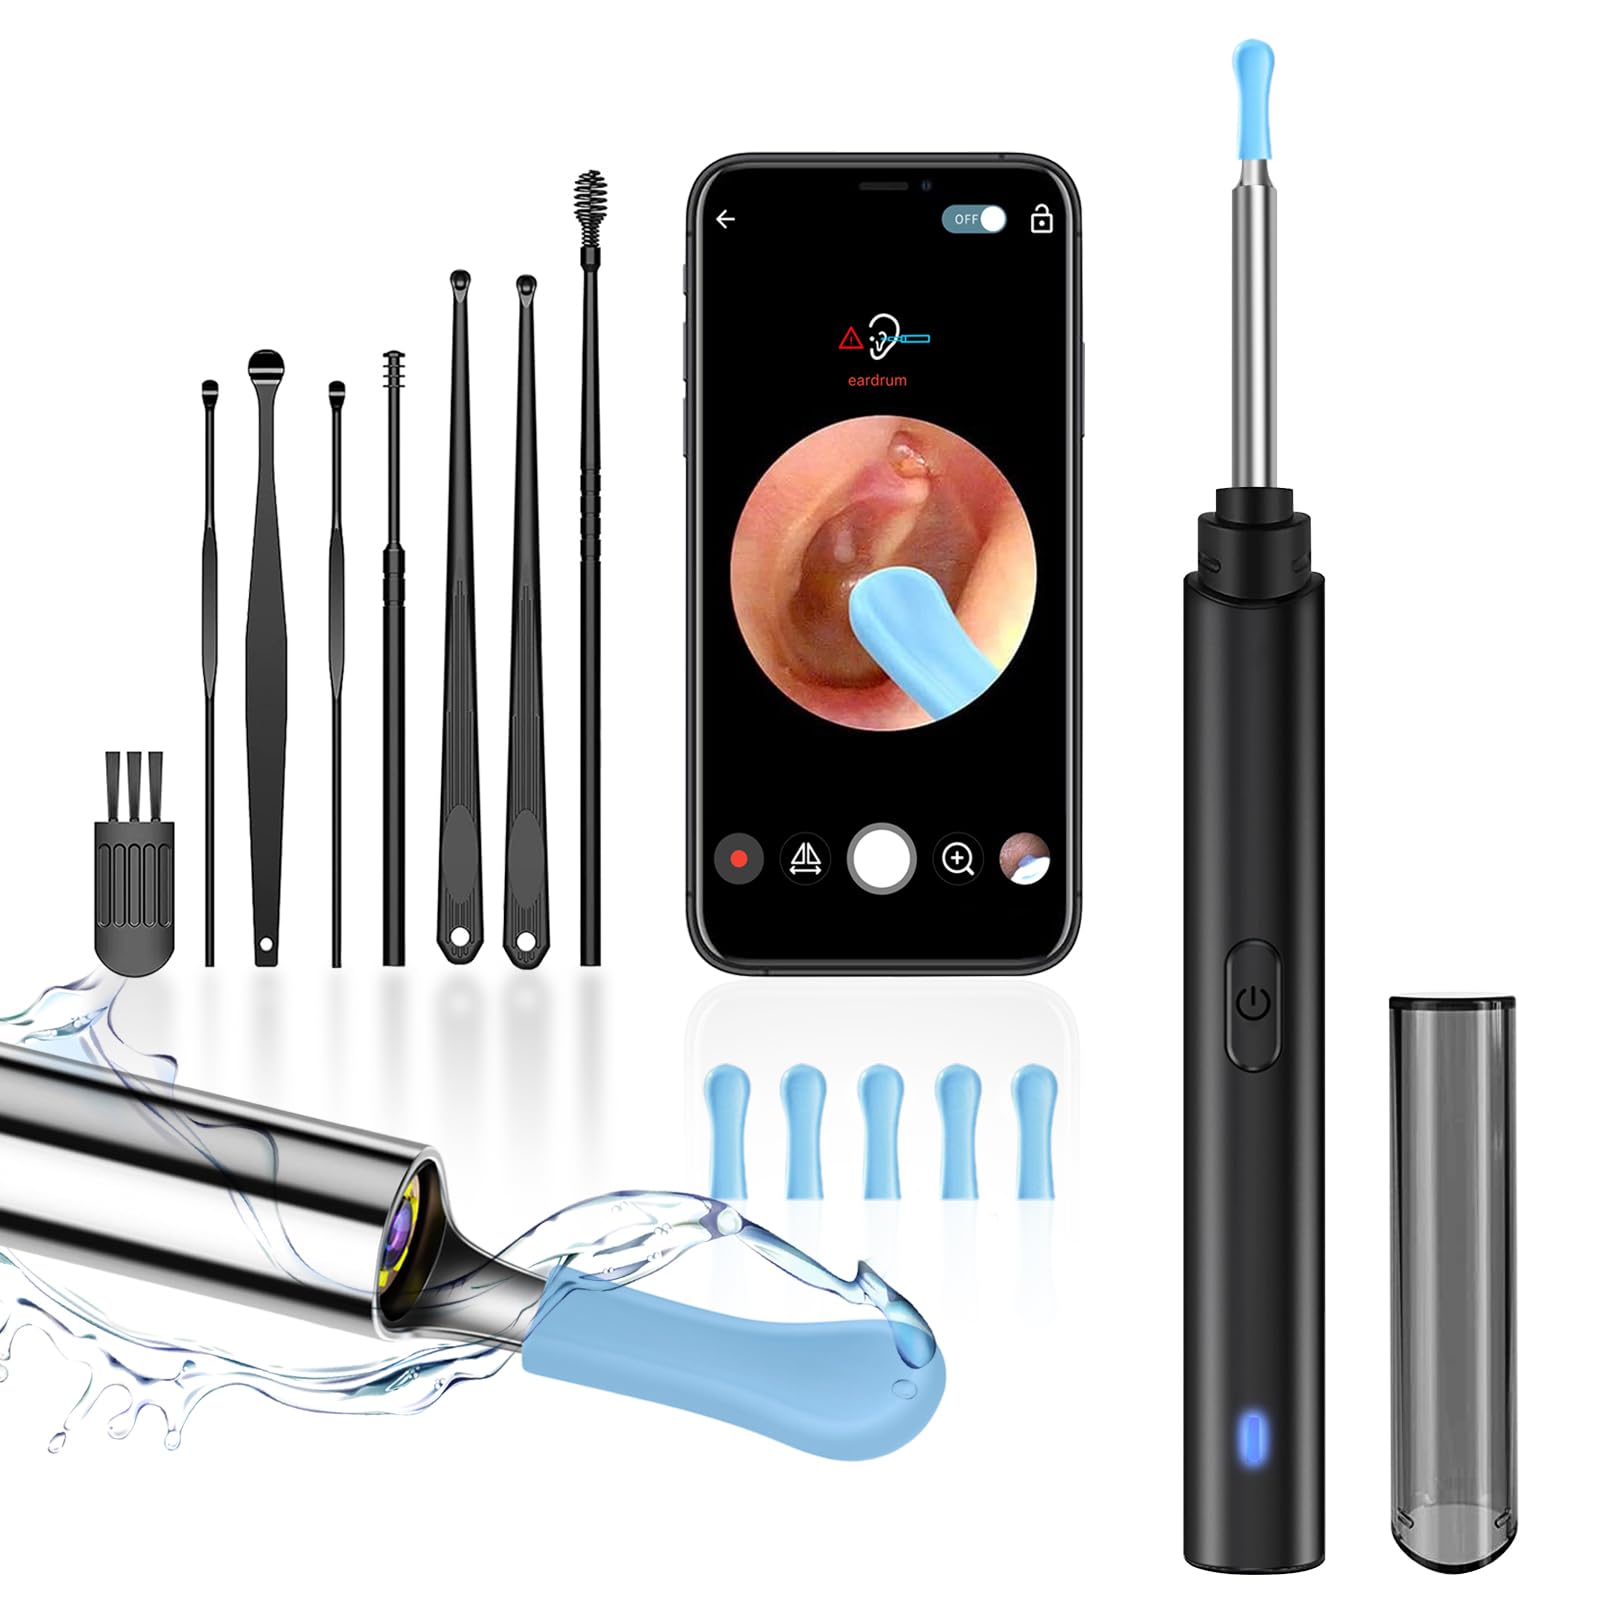 Ear Wax Removal Tool Camera Smart Visual Ear Cleaner 1080P FHD